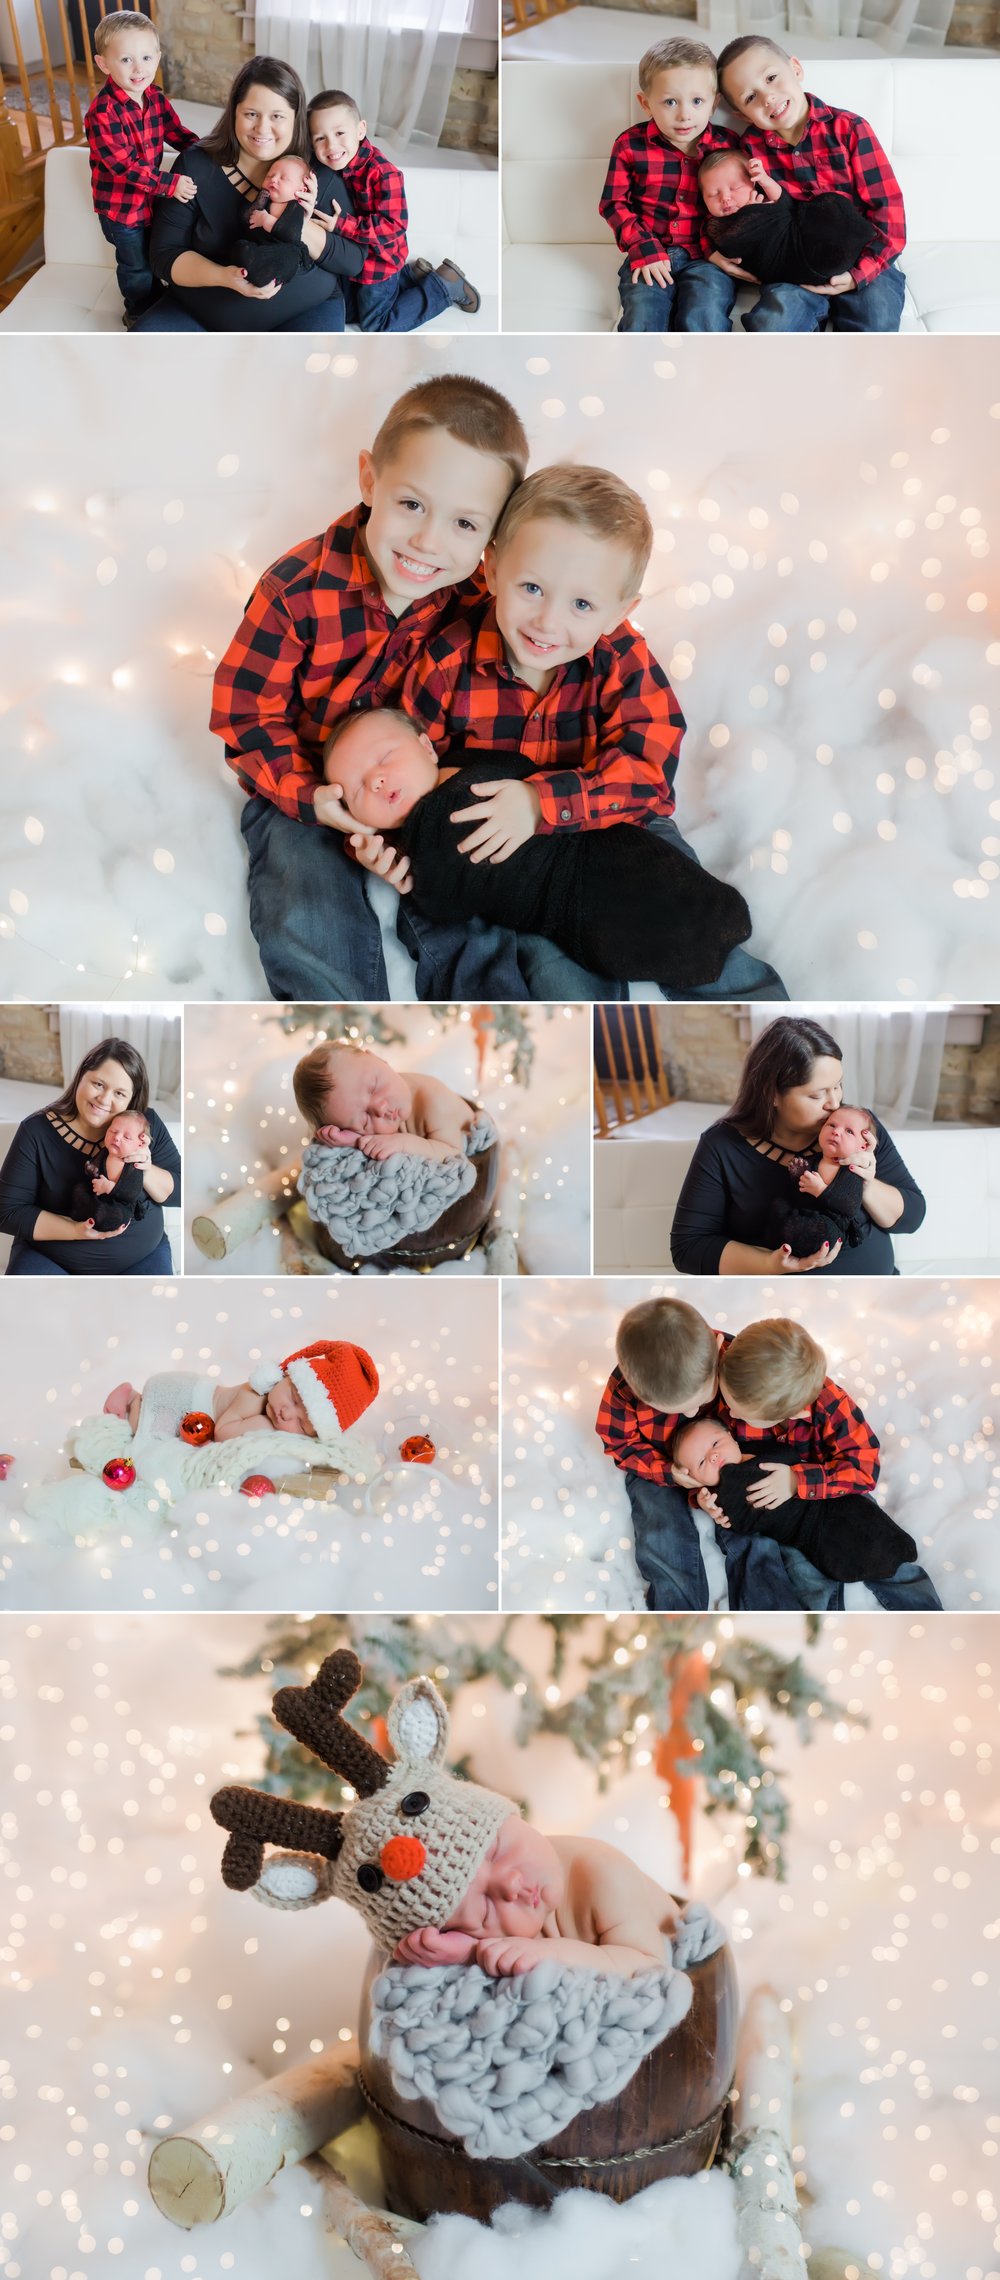  newborn_christmas_picture_boy_ideas_photography_session_rudolph_hat_reindeer_etsy 1 